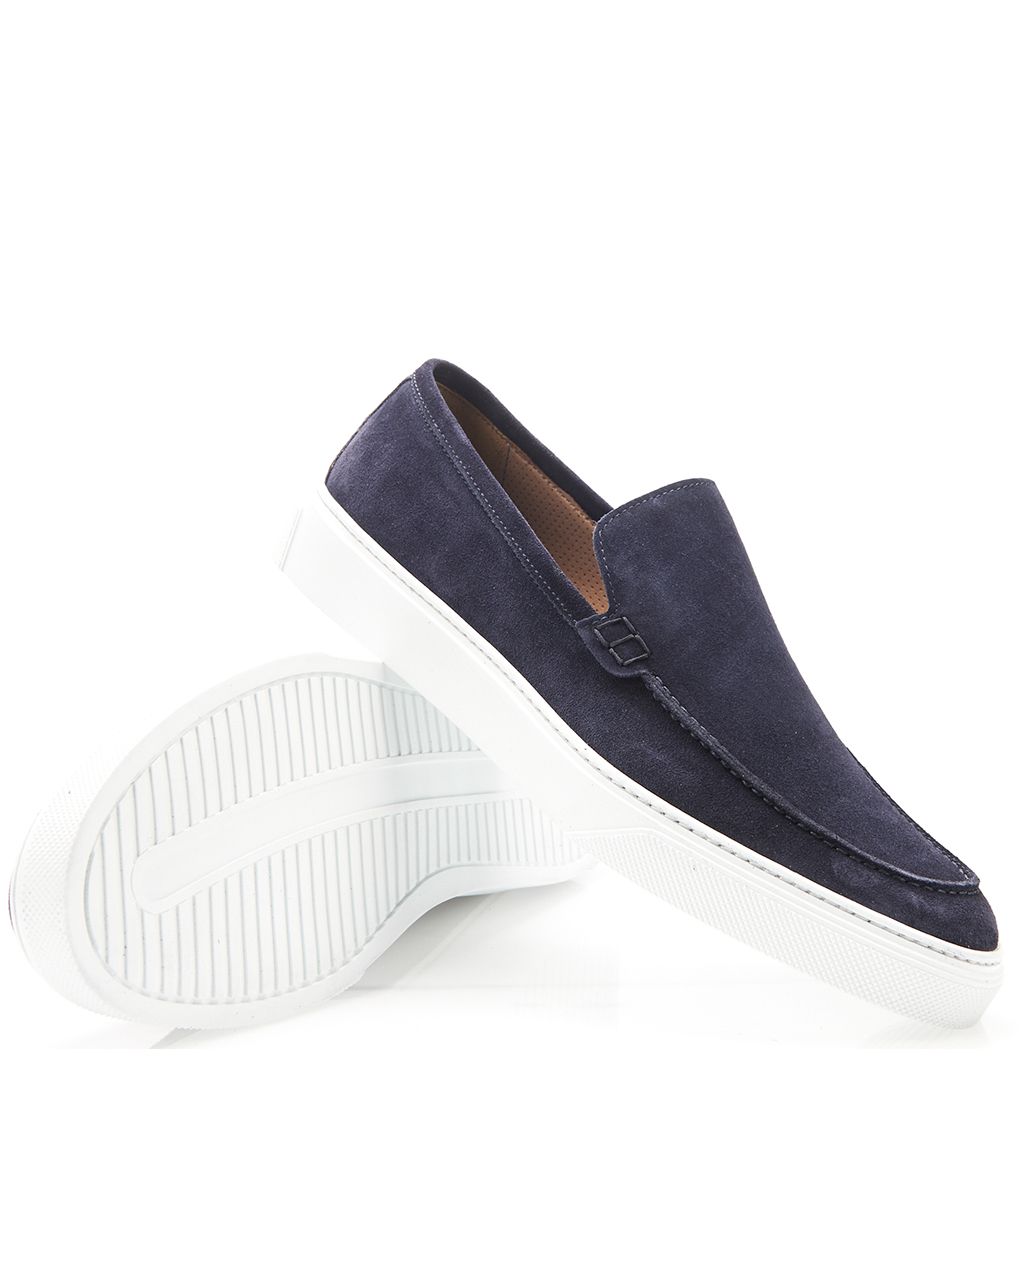 Giorgio Loafers Donker blauw 077121-001-38.5